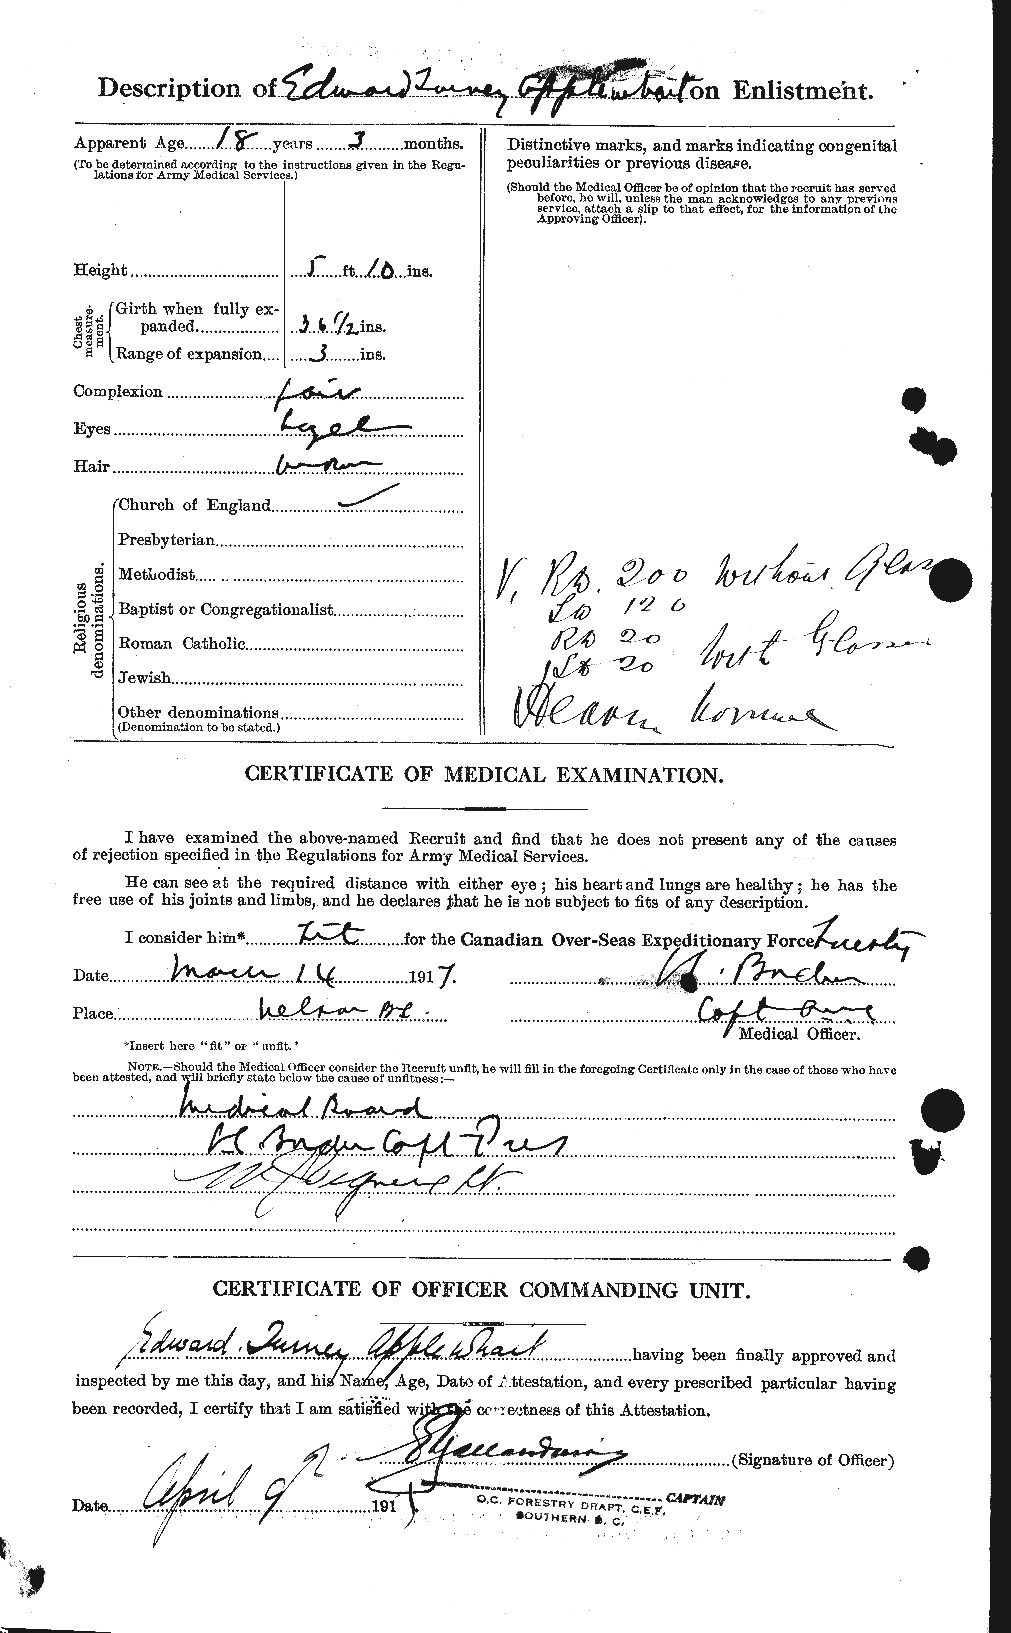 Personnel Records of the First World War - CEF 211231b